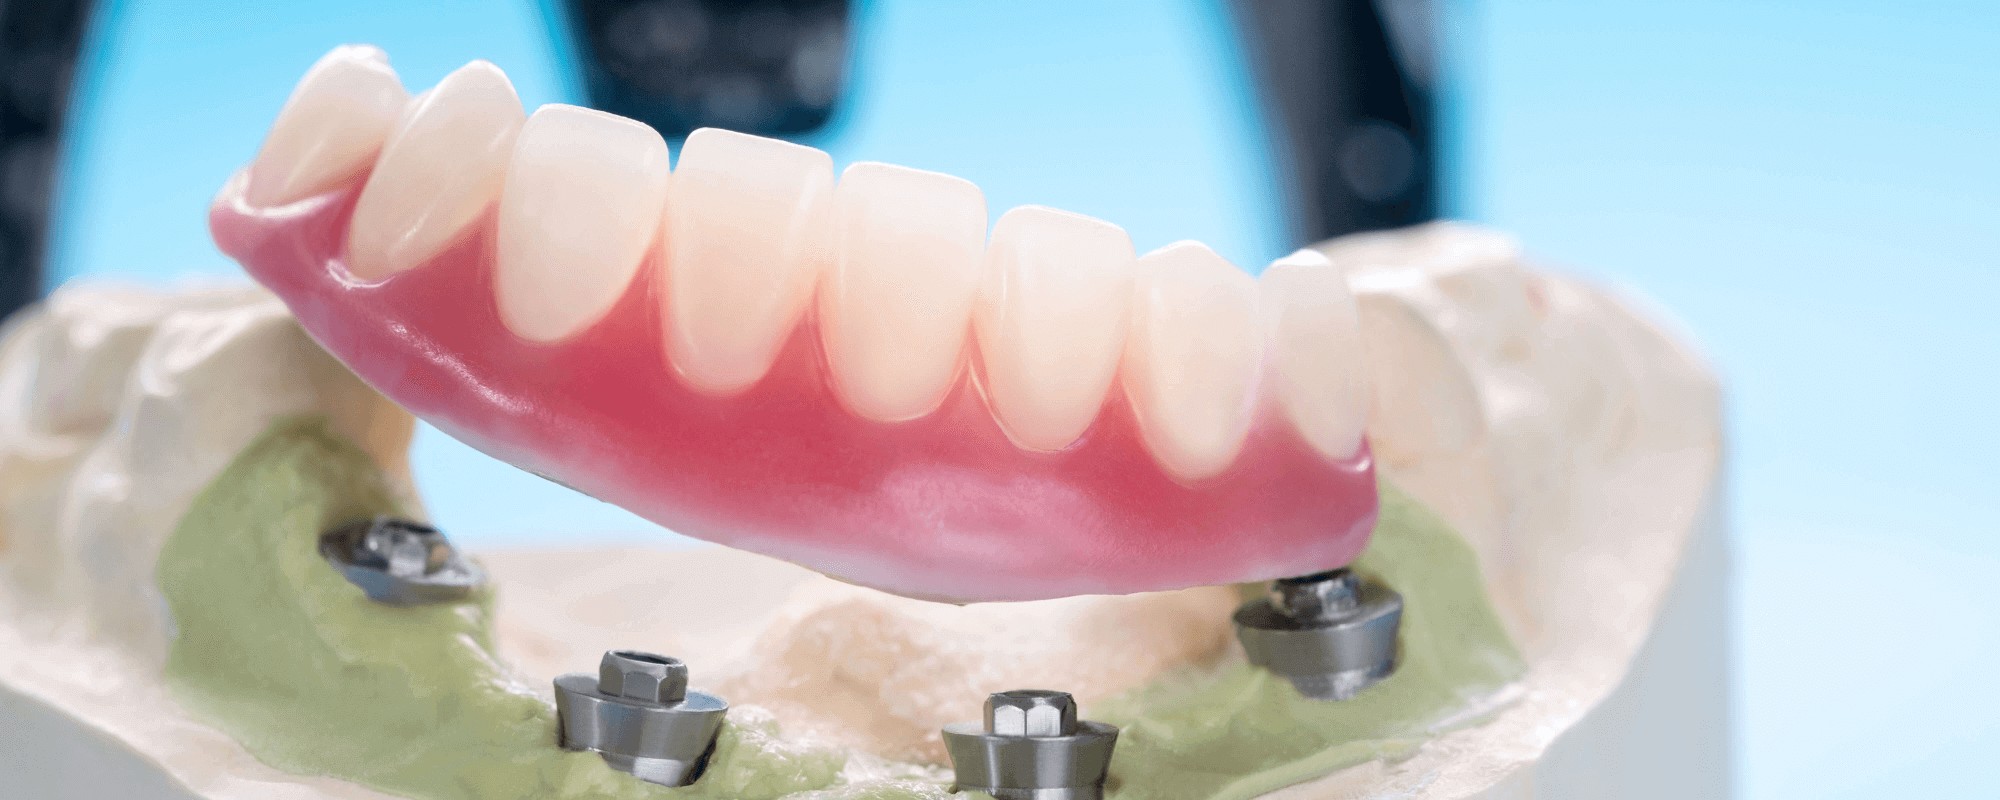 An implant-retained dentures half on a model of fake gums, showing the metal screws that would be in a person's jawbone.